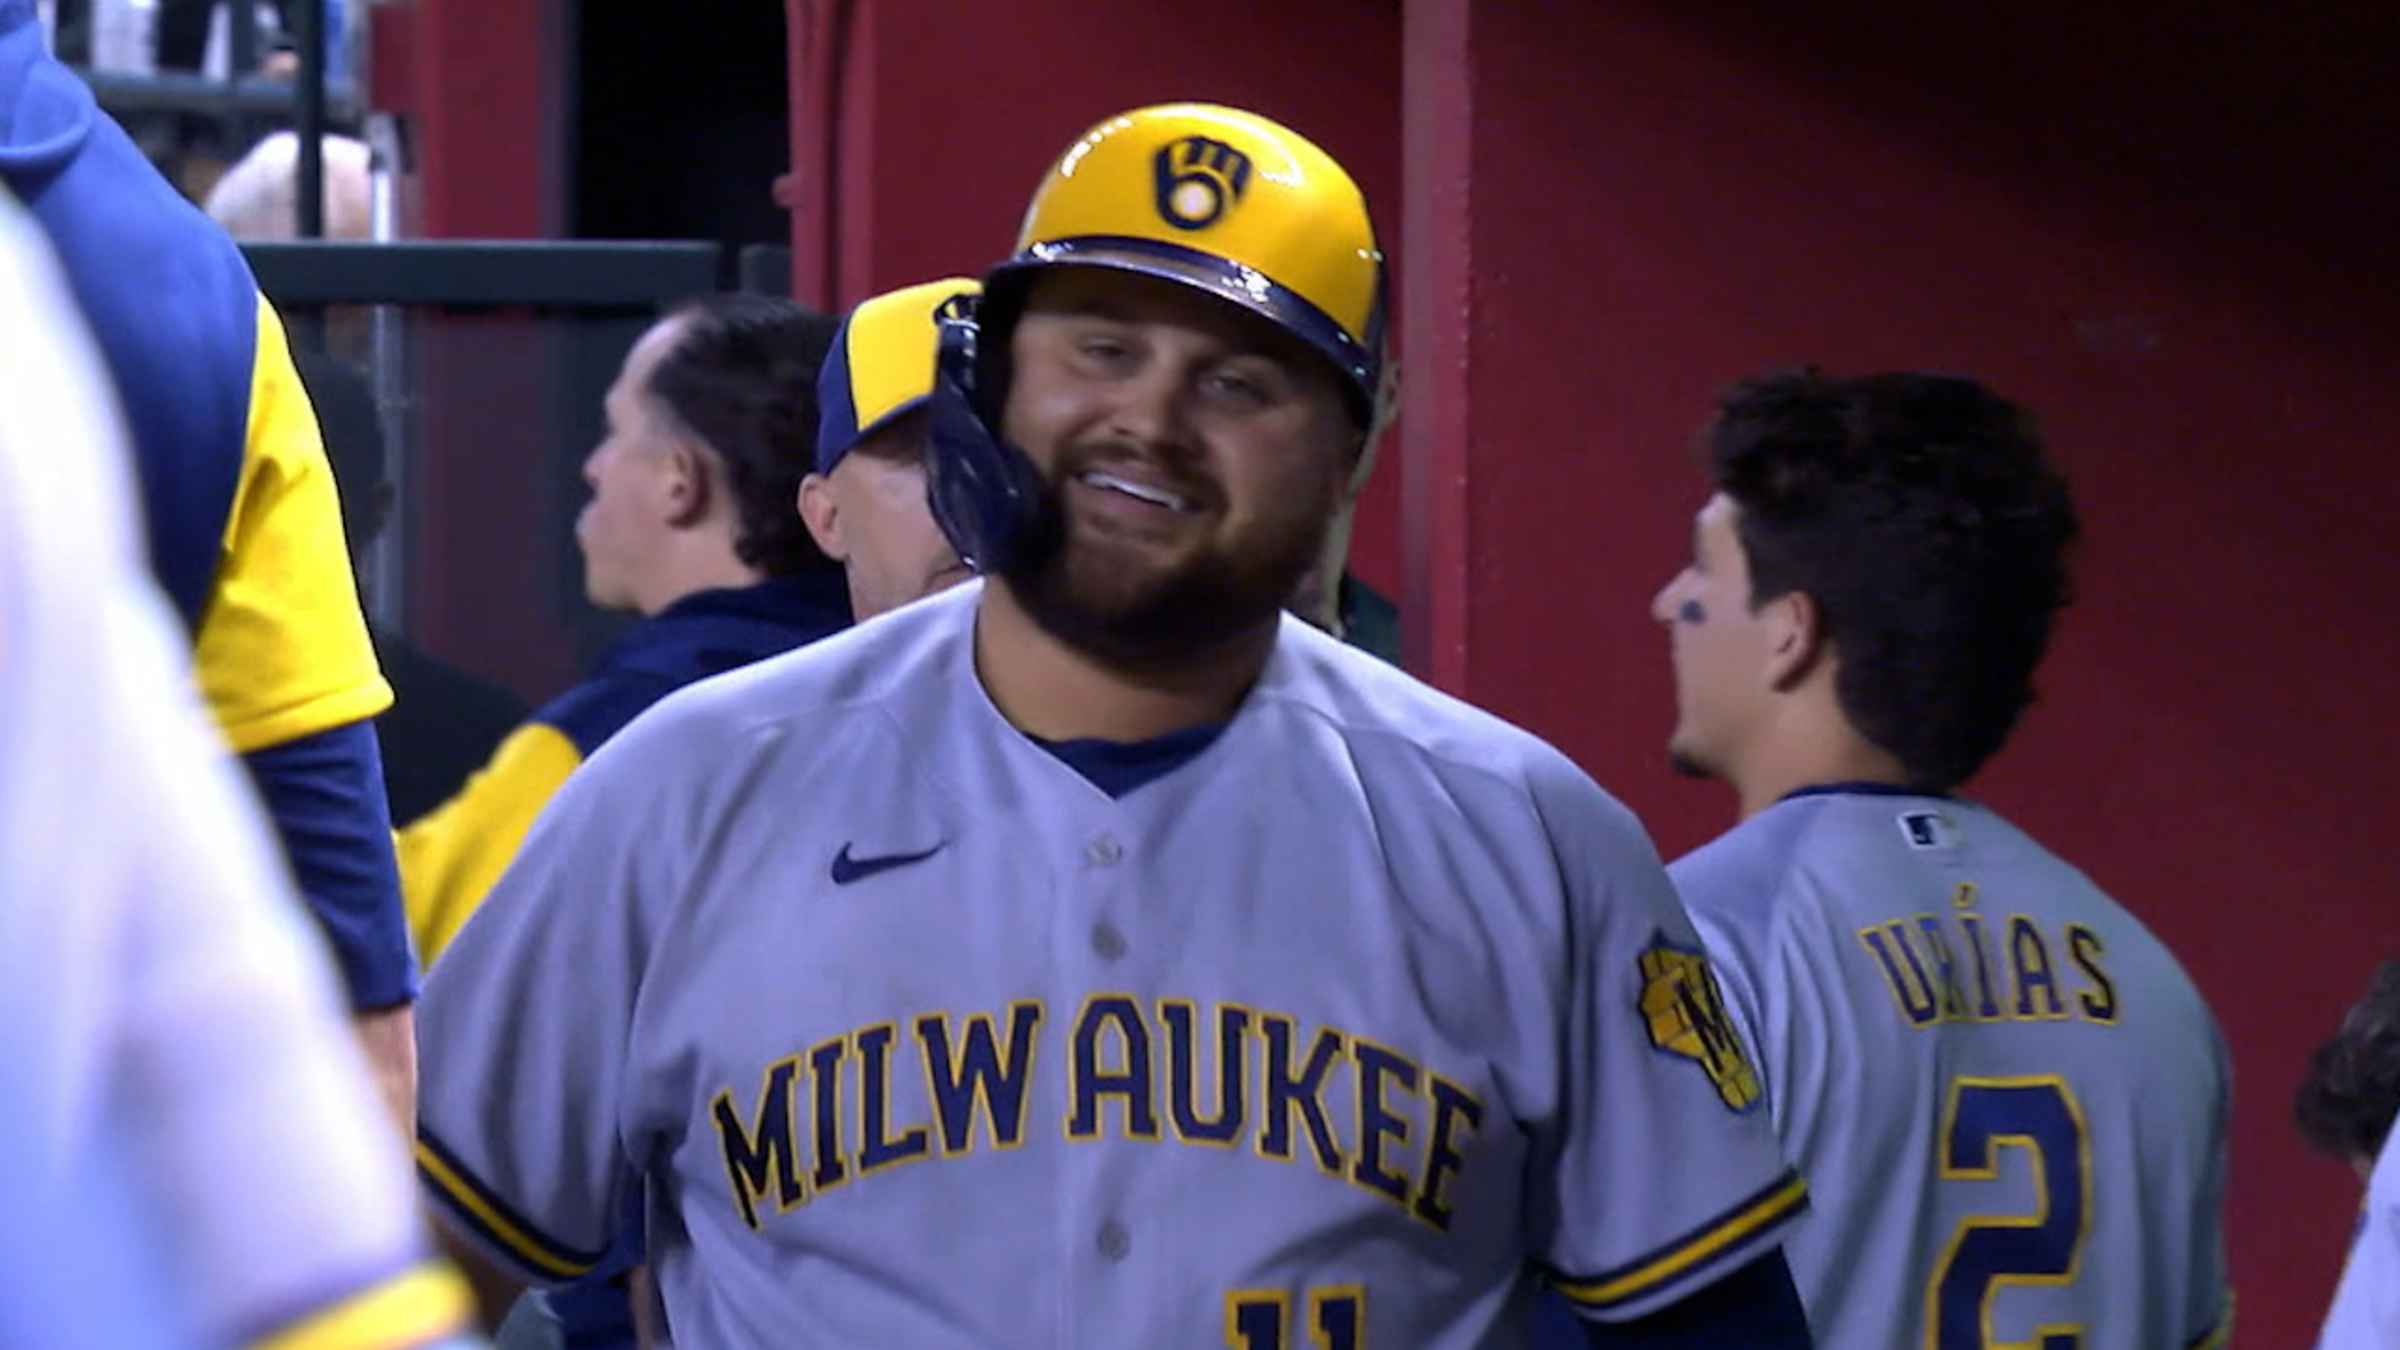 Rowdy Tellez sparks rally with 3-run homer as Bisons take series